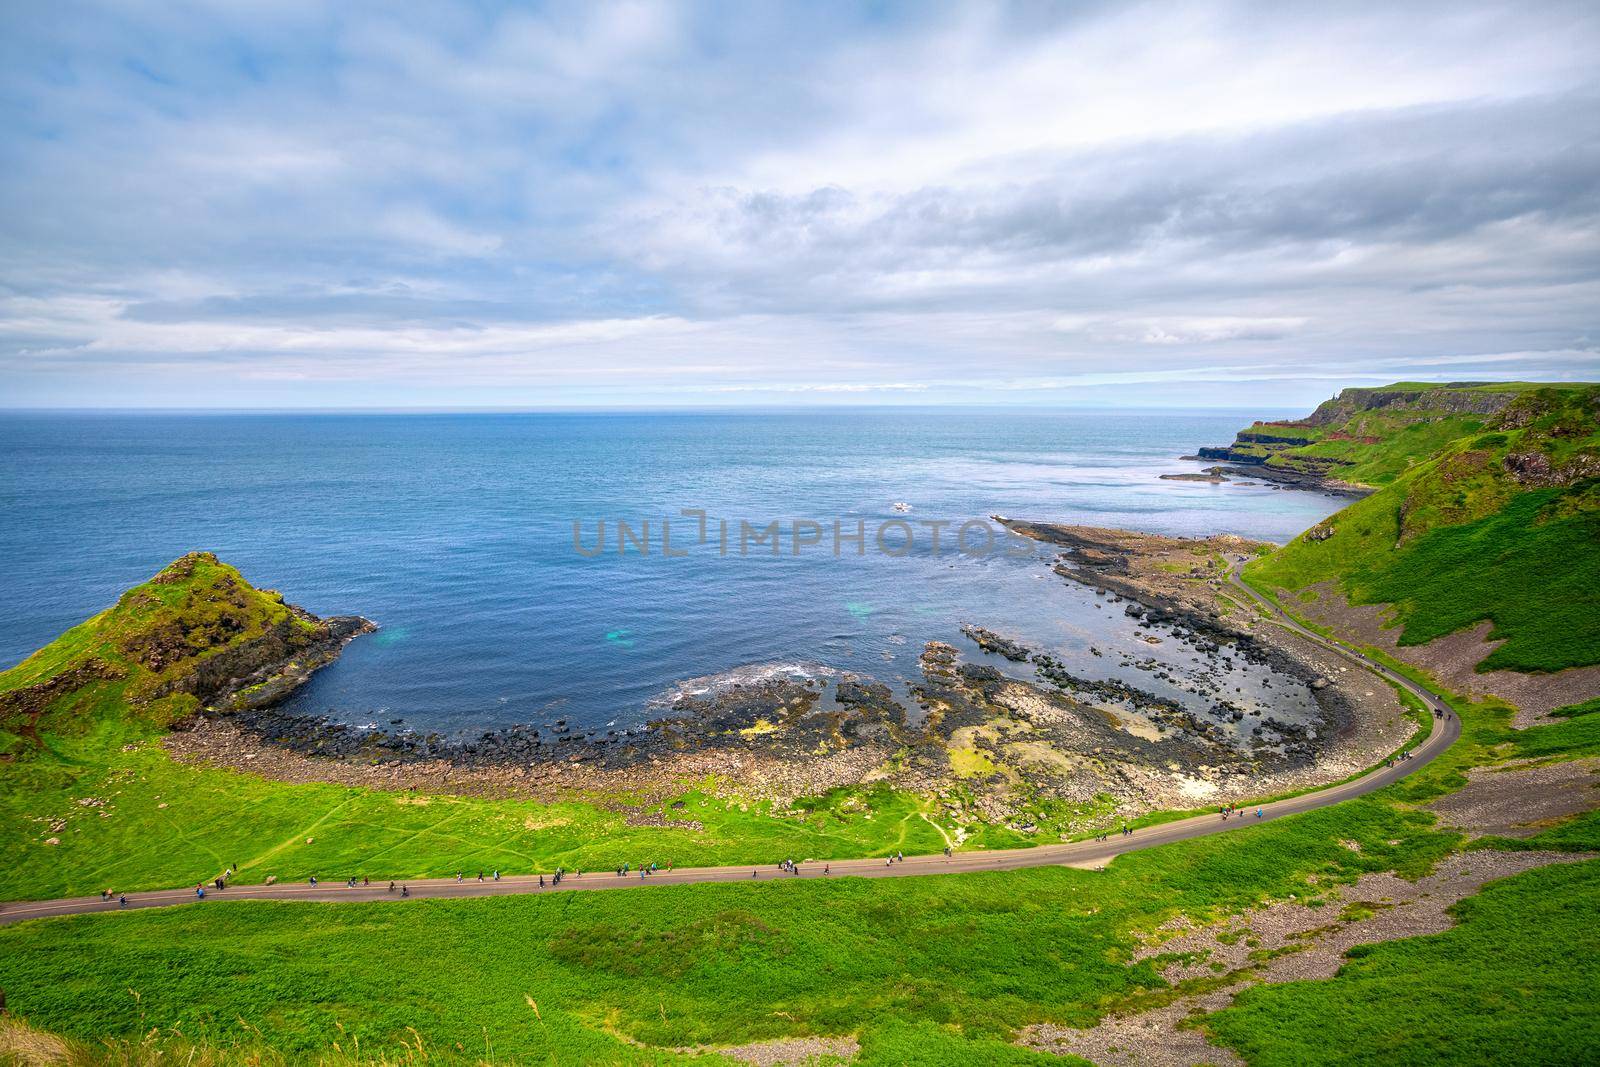 Portnaboe bay and North Antrim Cliff from Great Stookan, Giant's Causeway, UK by zhu_zhu